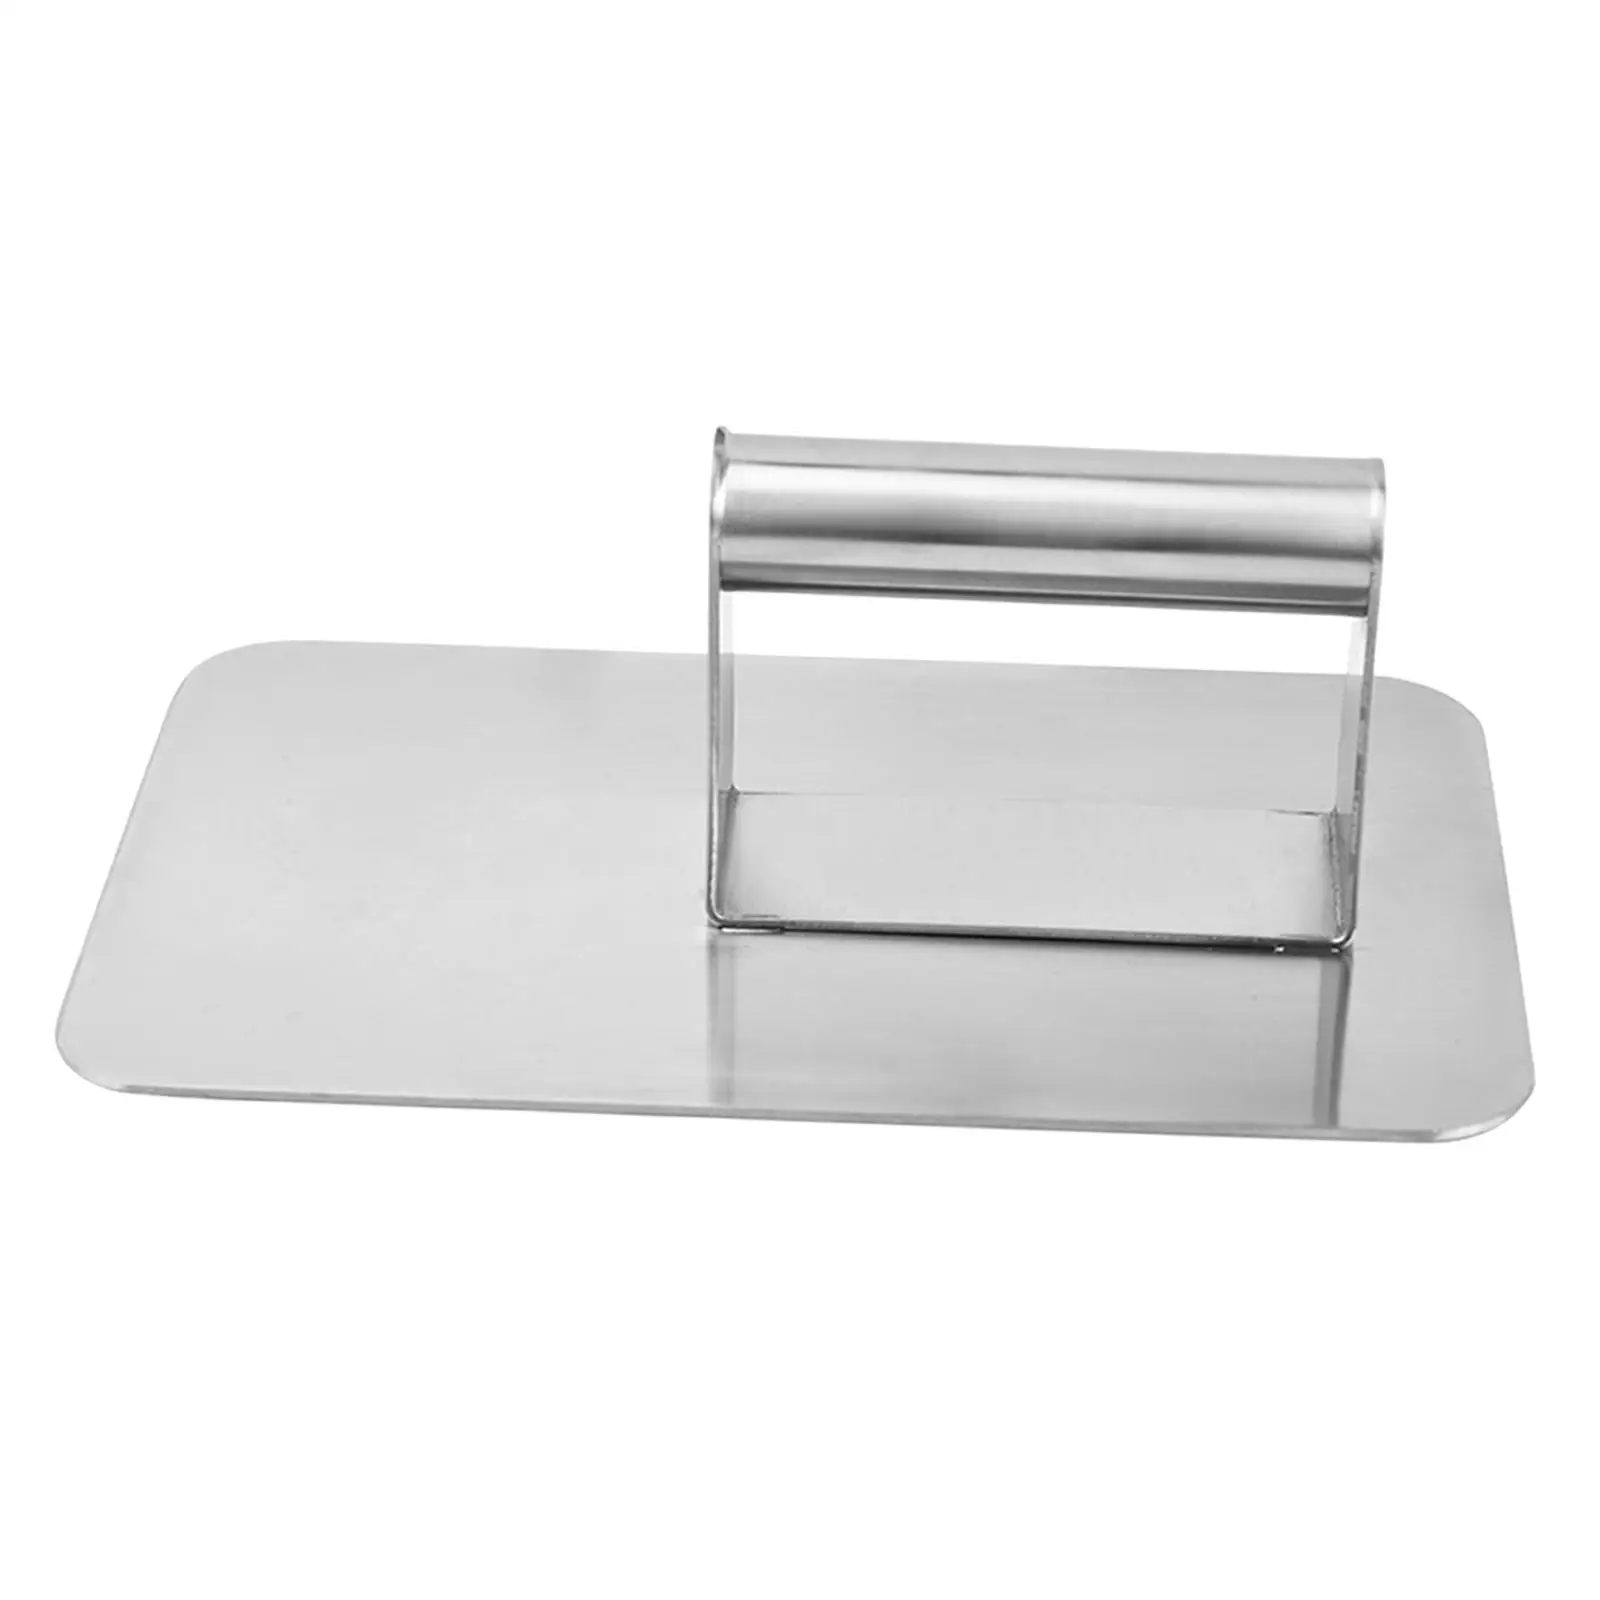 Stainless Steel Burger Press Rectangle Nonstick Flat Bottom Steak Press Grill Press for Steak Making Cooking Grilling Tool Grill